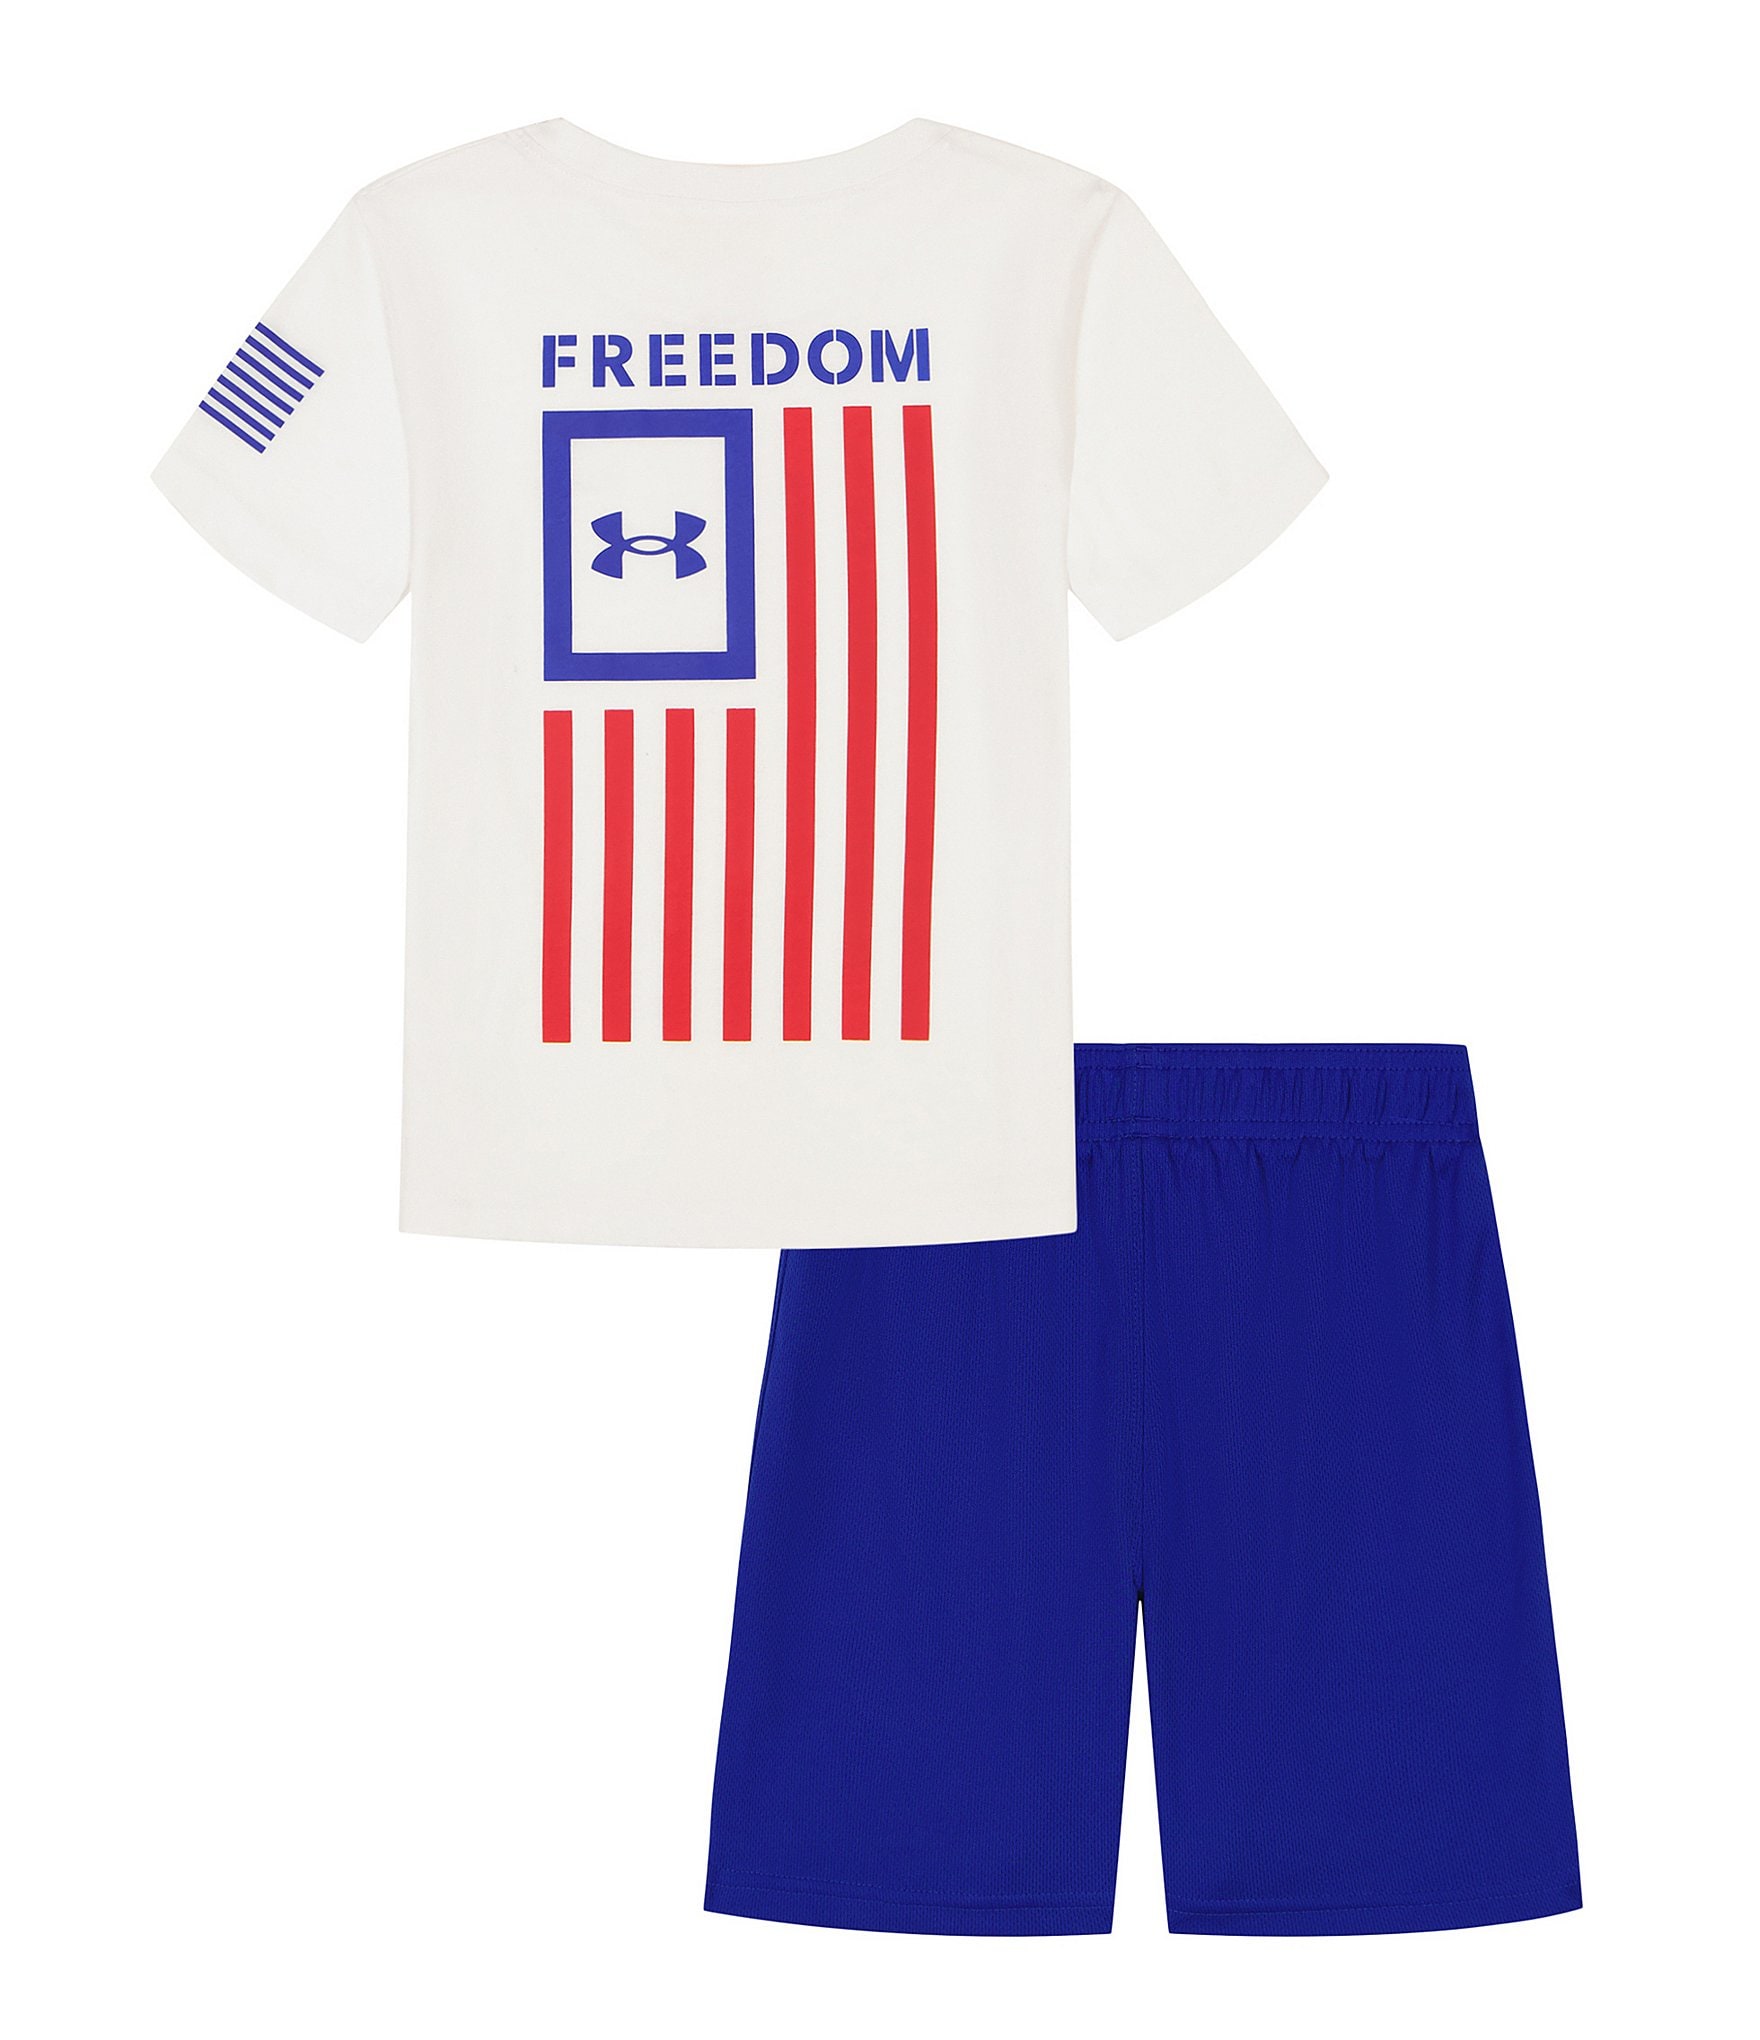 Youth Under Armour Freedom Flag T-Shirt